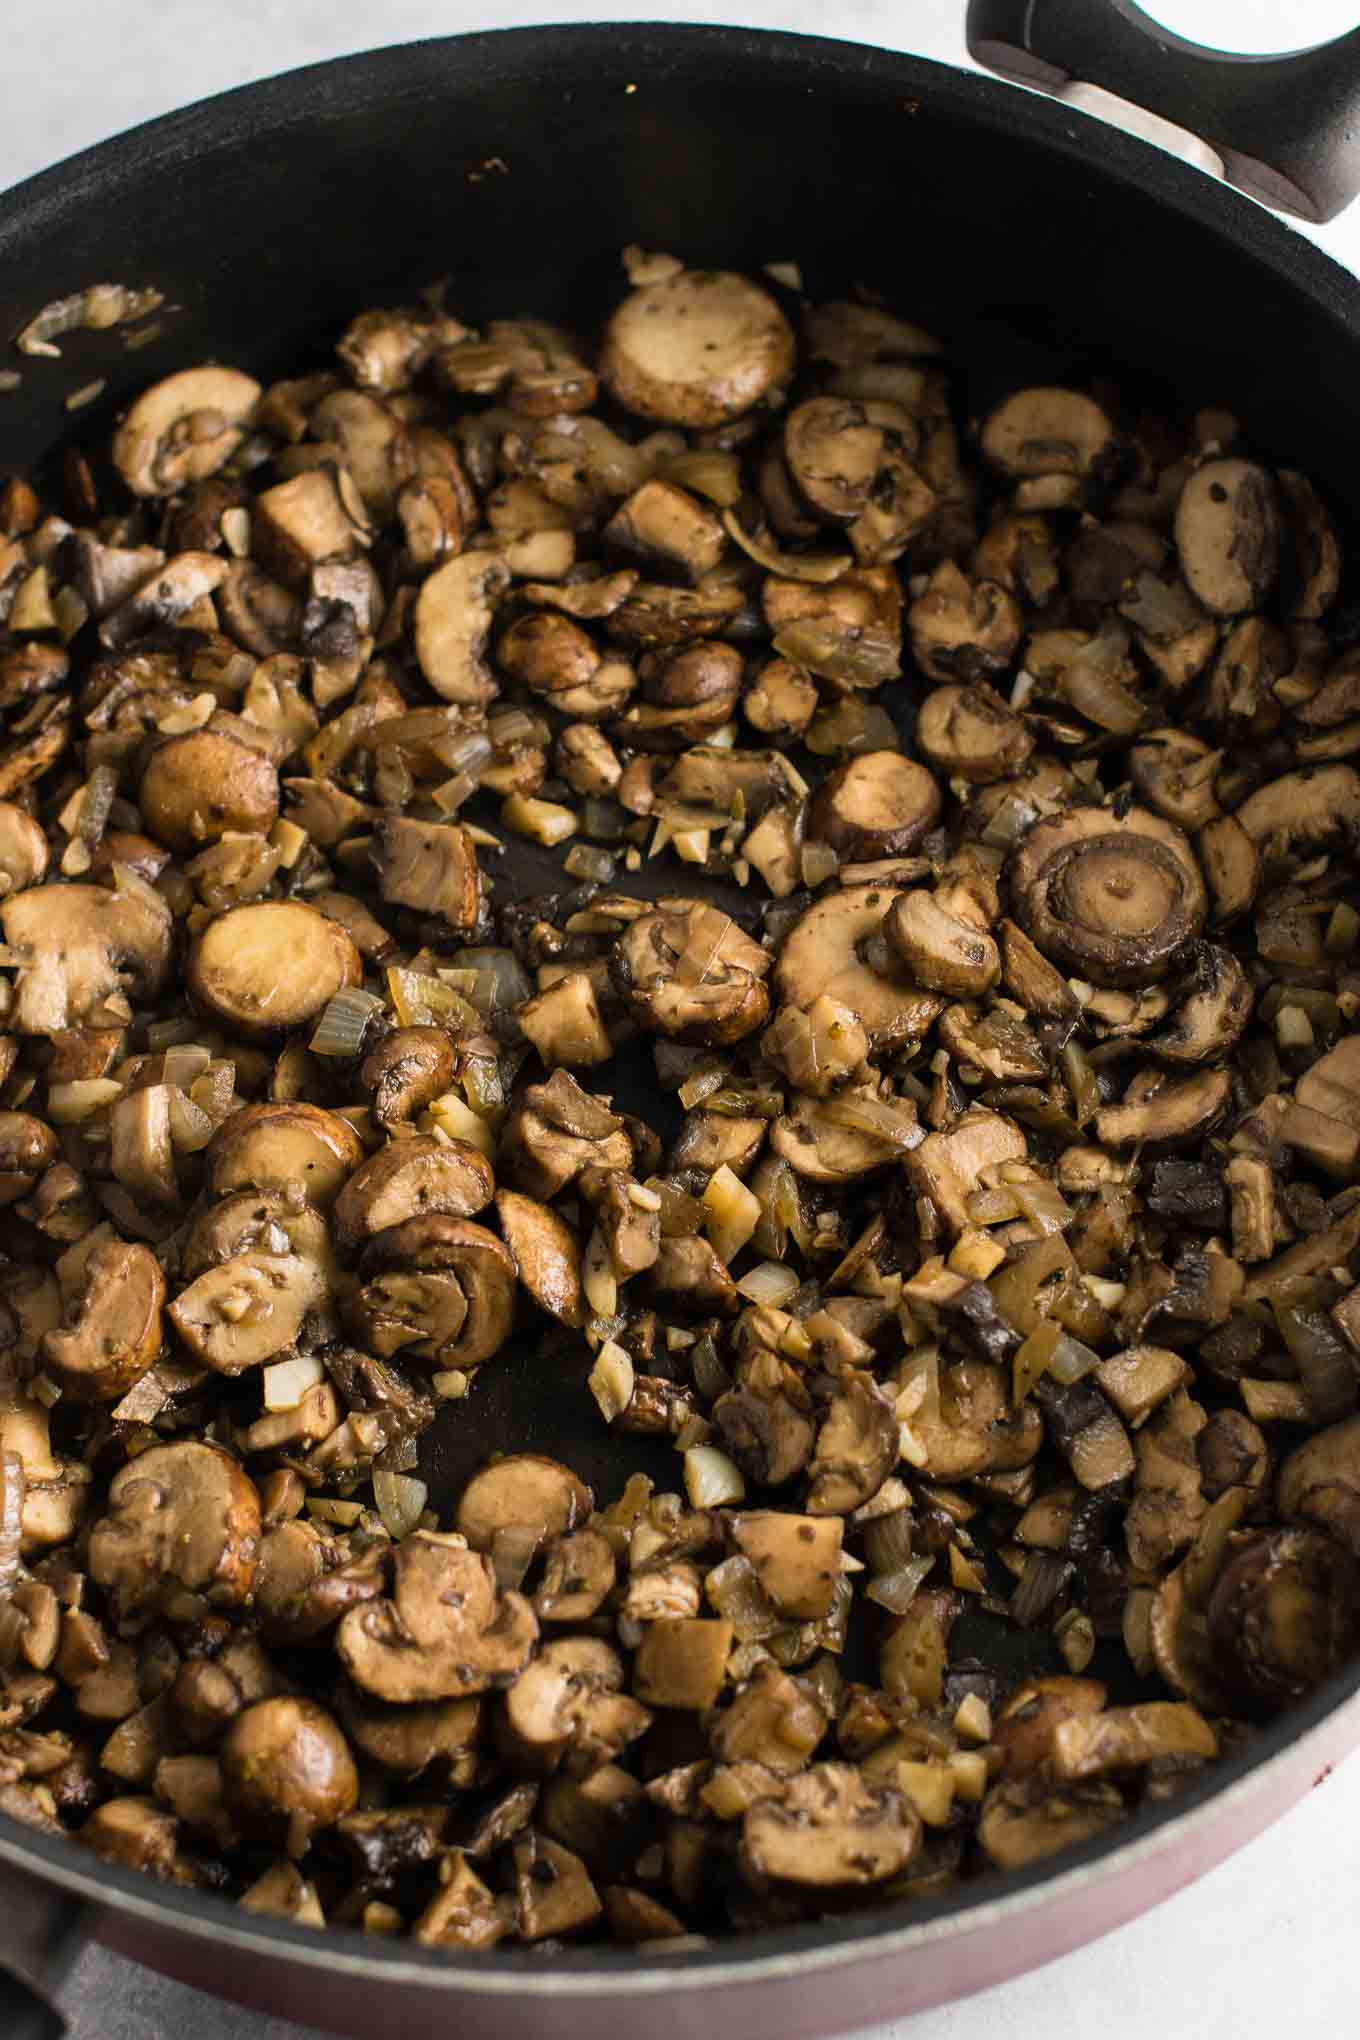 the mushrooms, garlic, and onion browned after cooking